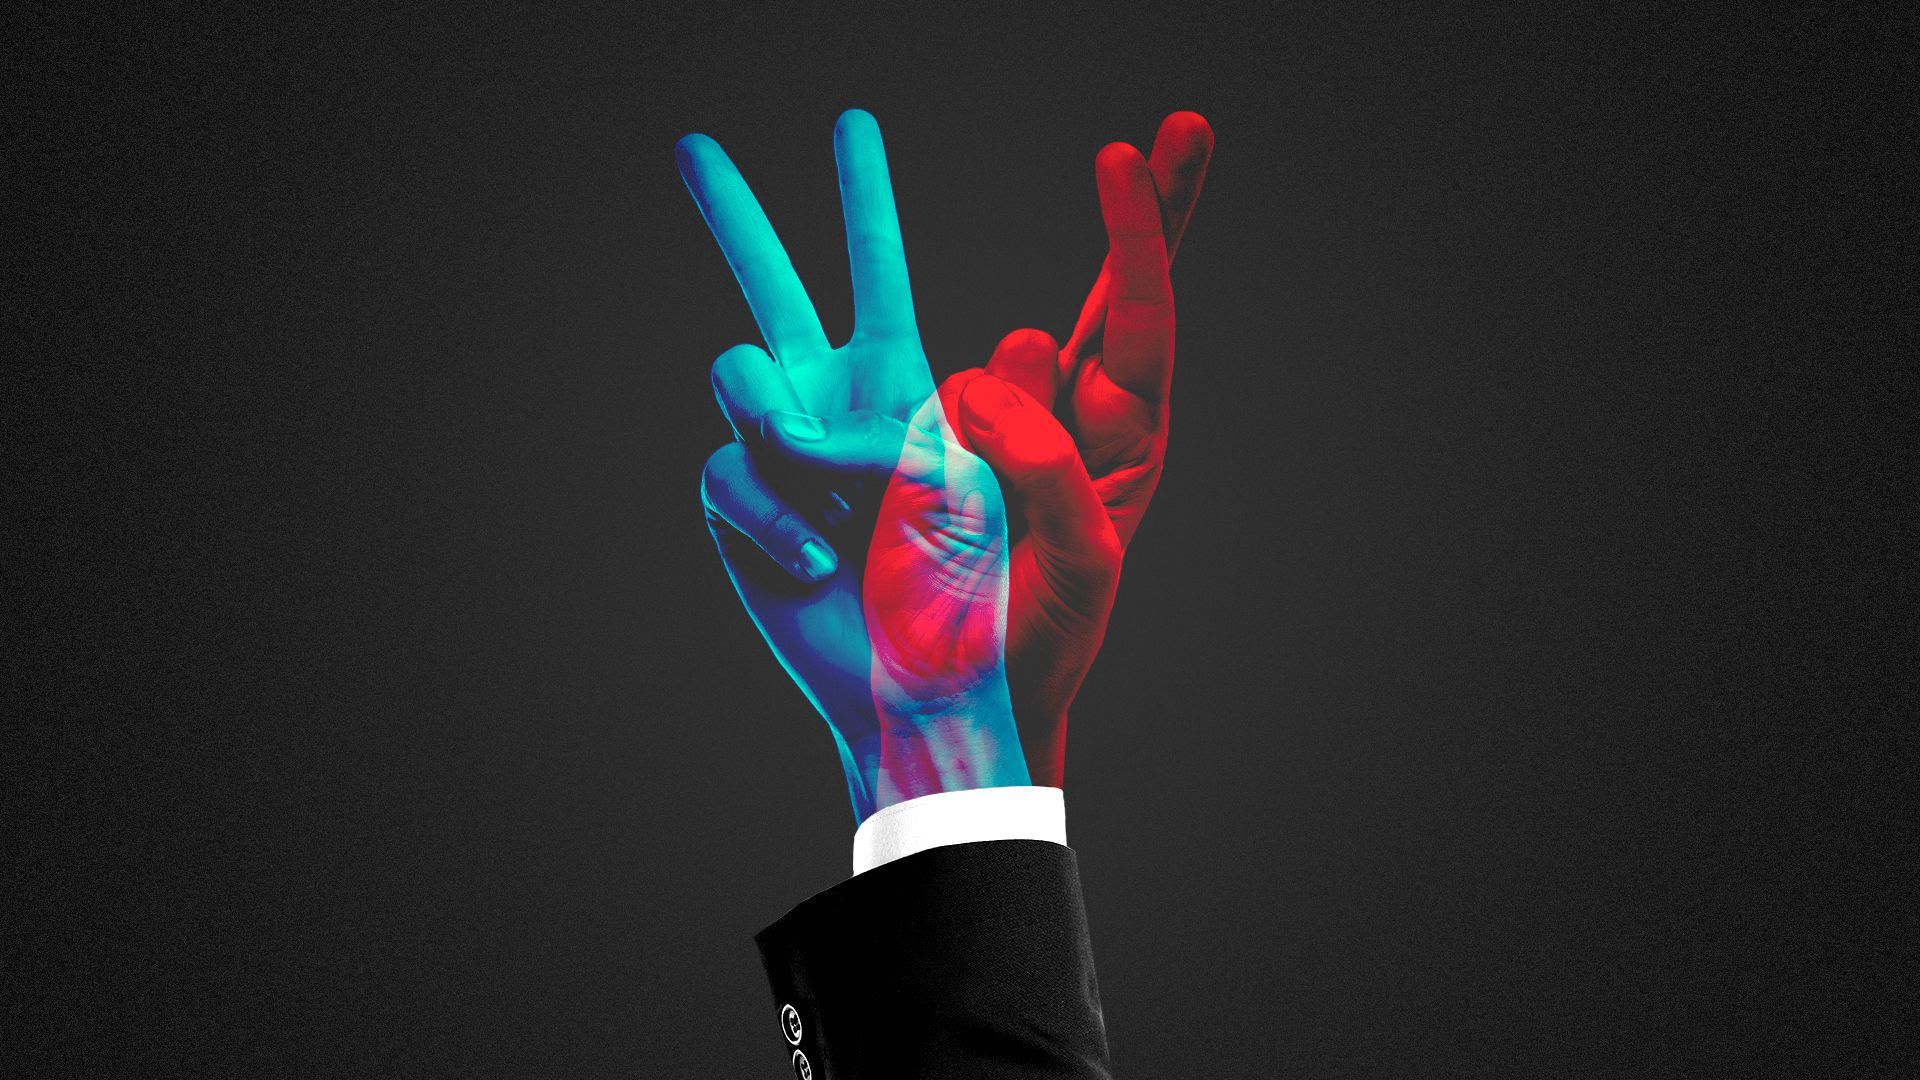 An illustration of blue and red hands intertwined.